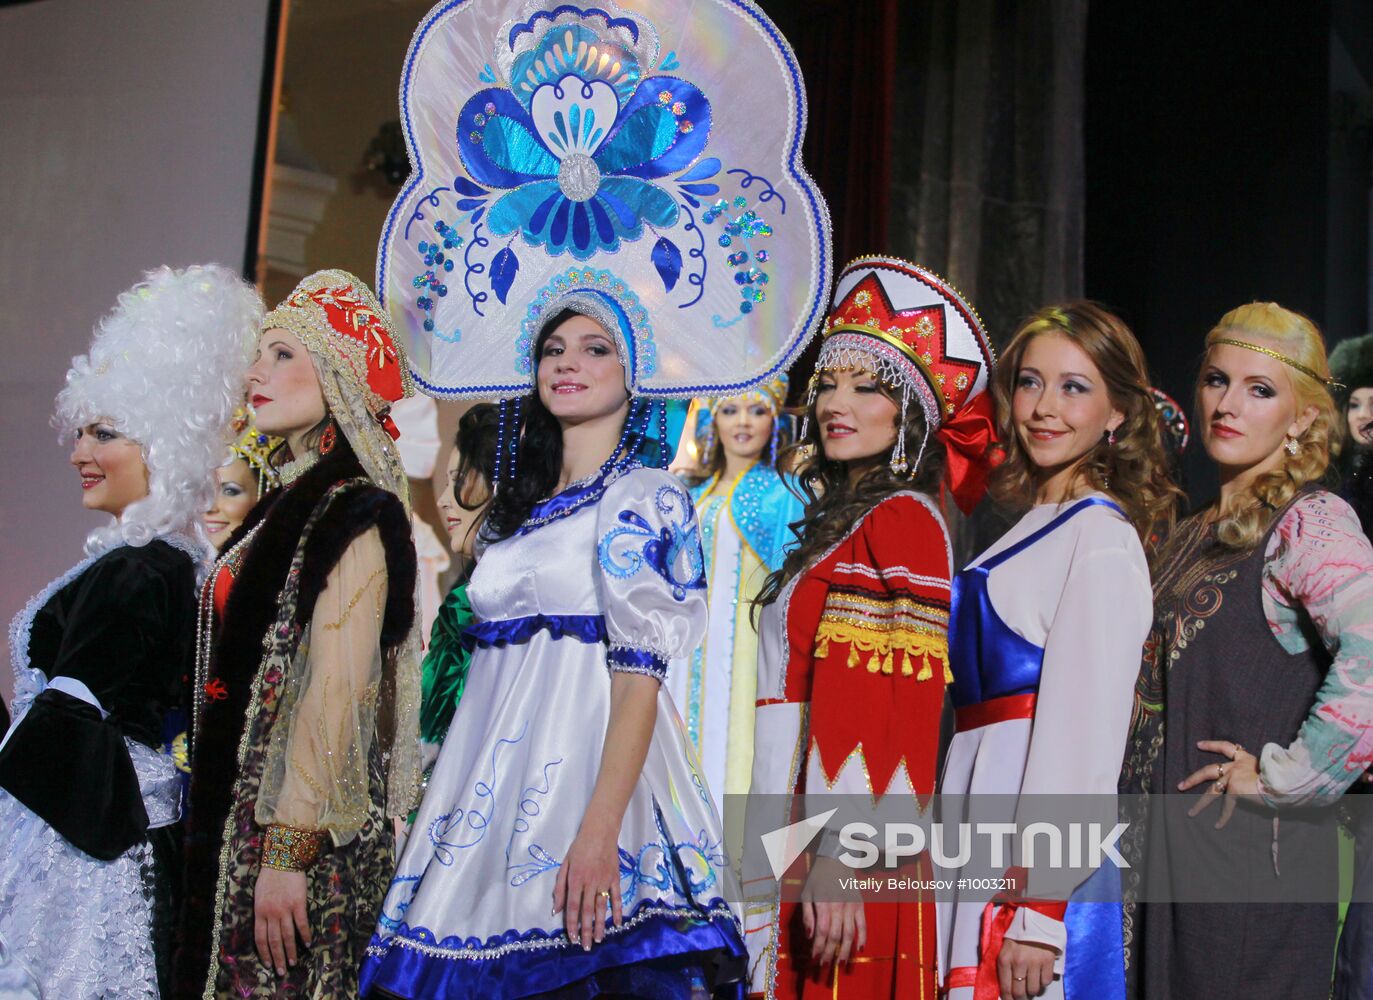 Final of "Mrs. Russia 2011" beauty contest